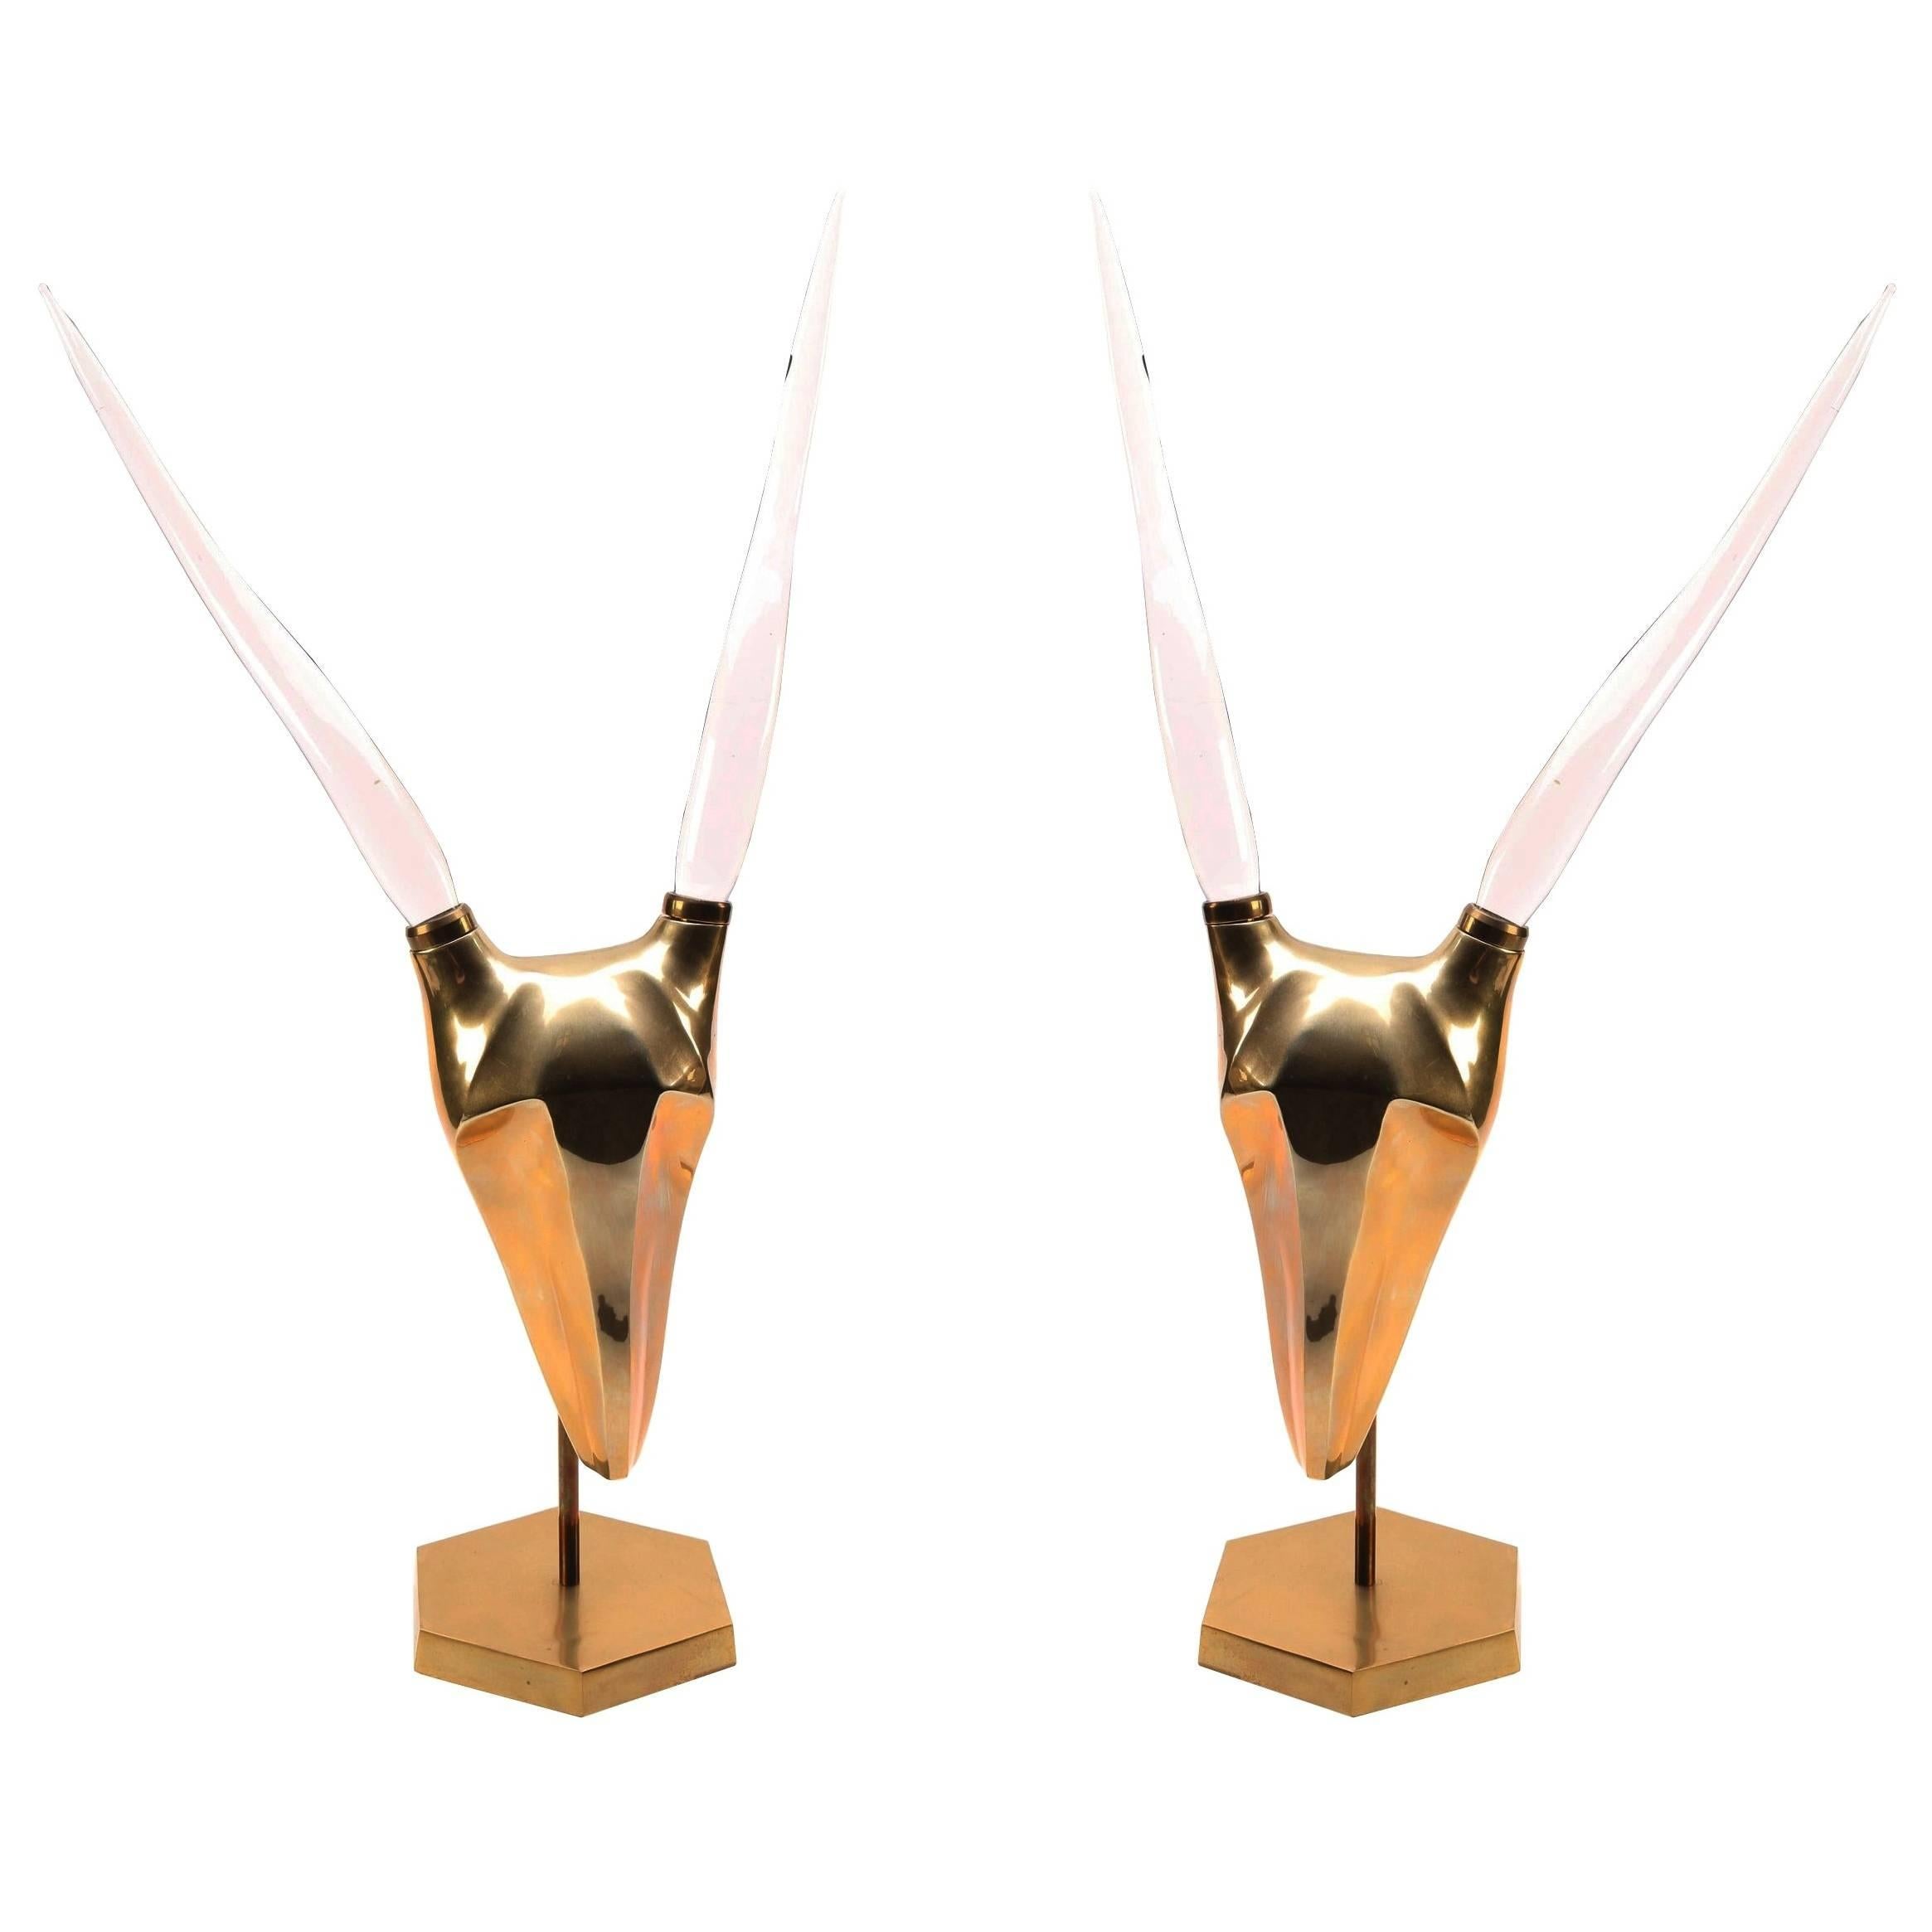 Pair of Lucite and Brass Ram Sculptures, circa 1970s For Sale